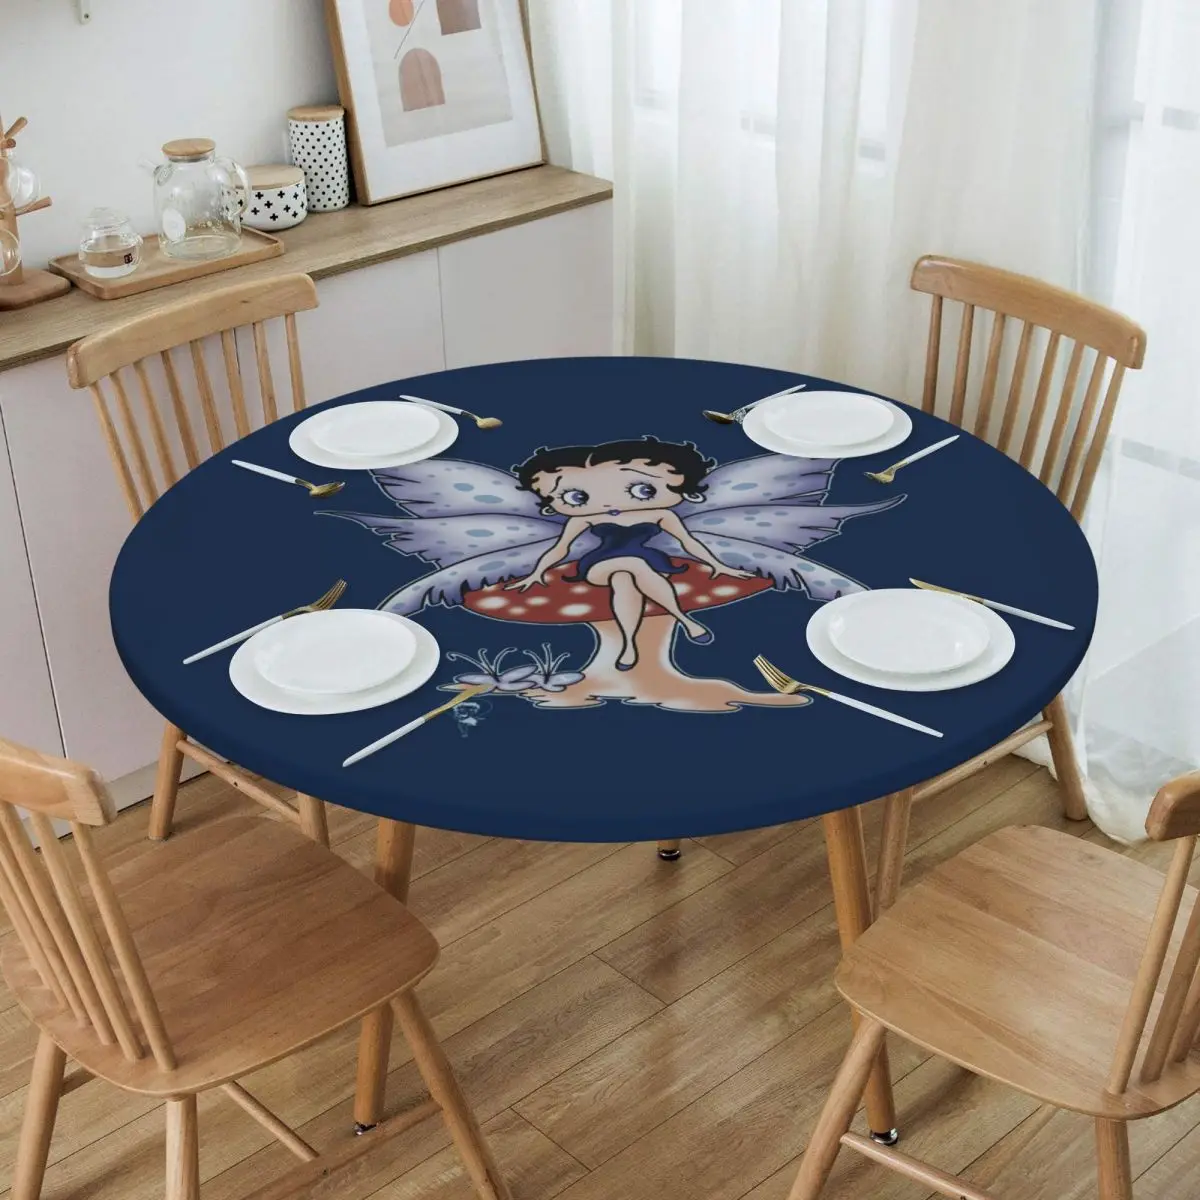 

Round Fitted Boop Bettys Mushroom Fairy Table Cloth Oilproof Tablecloth 40"-44" Table Cover Backed with Elastic Edge